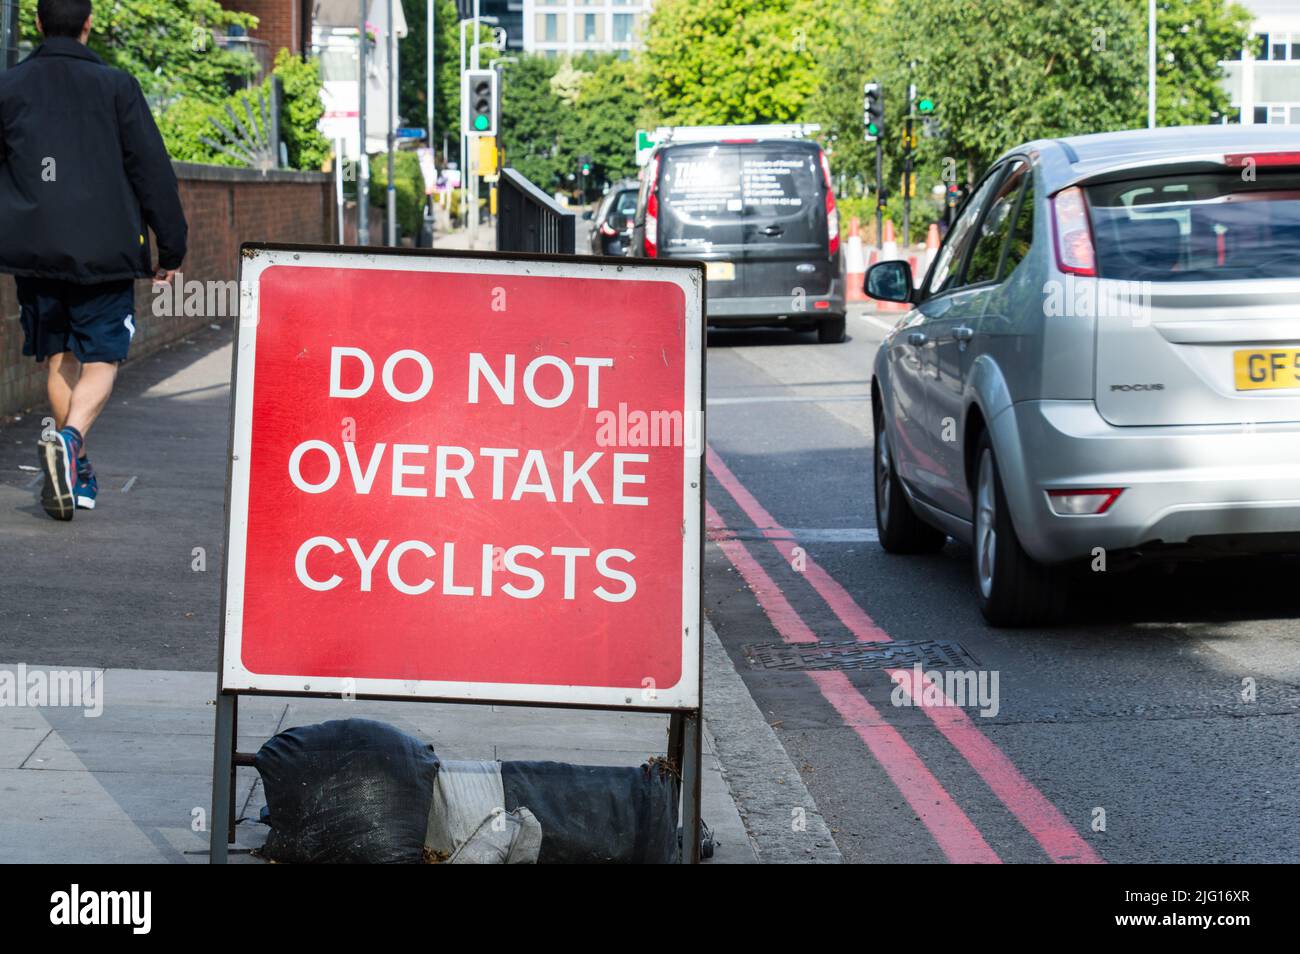 Do Not Overtake Cyclists road sign in a single lane road Stock Photo